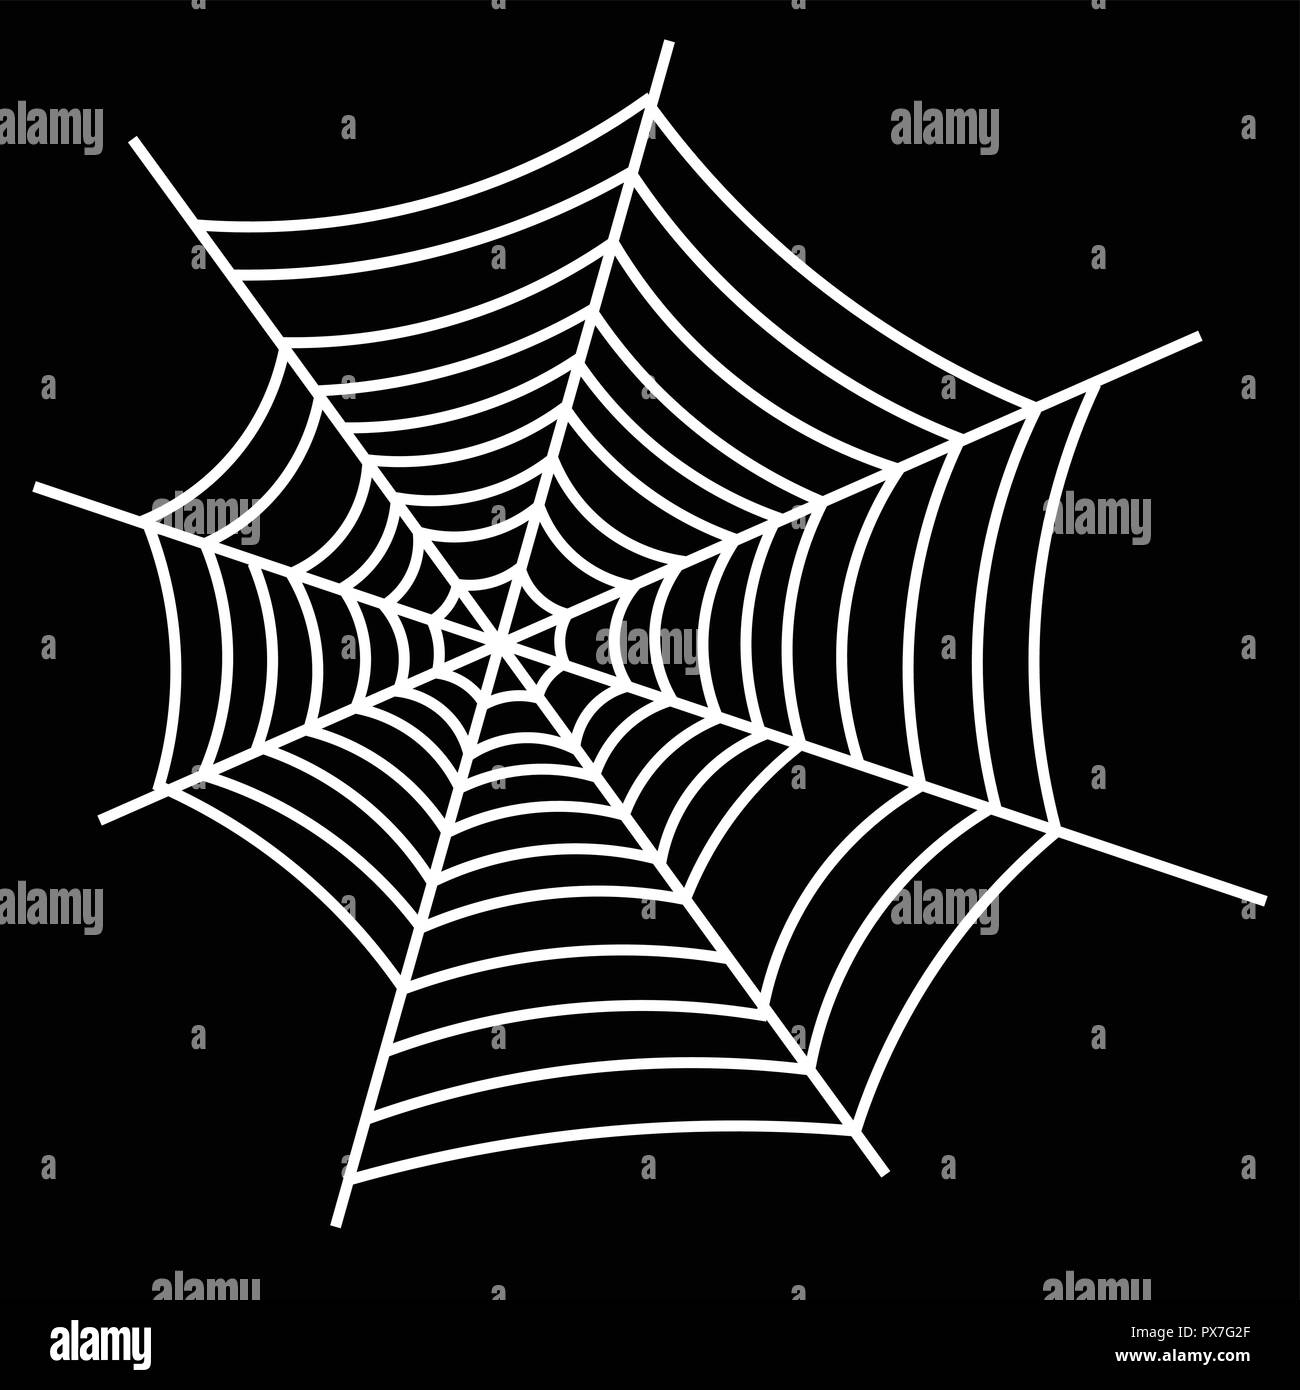 Halloween Icon: The Sticky Spider Web Stock Vector